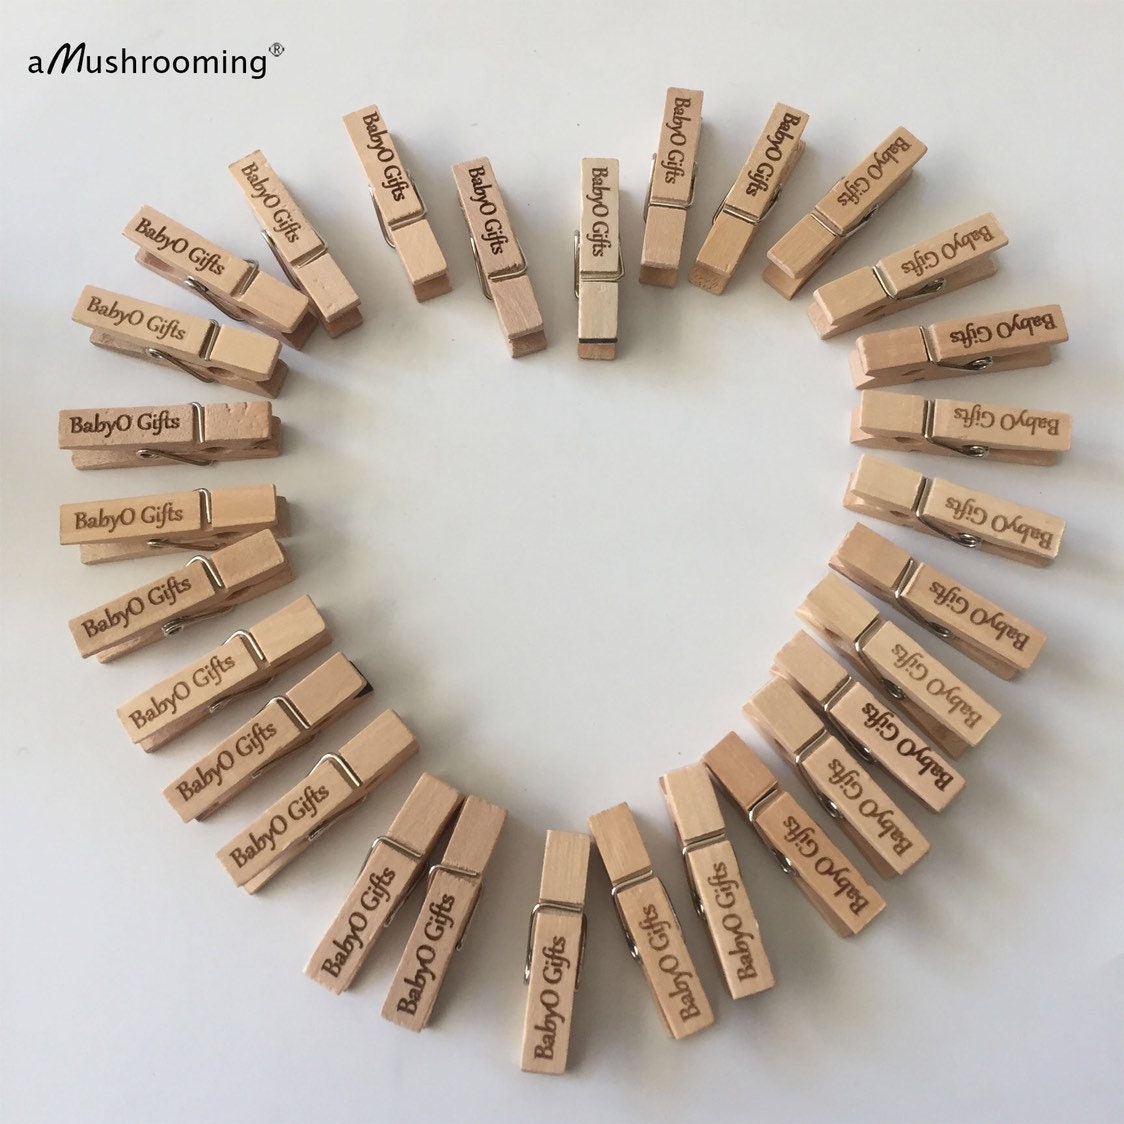 Wooden Clothespins 7.2cm - Set of 100 Decorative Wooden Clothespins -  Wooden Photo Clips - for DIY Crafts Clothes